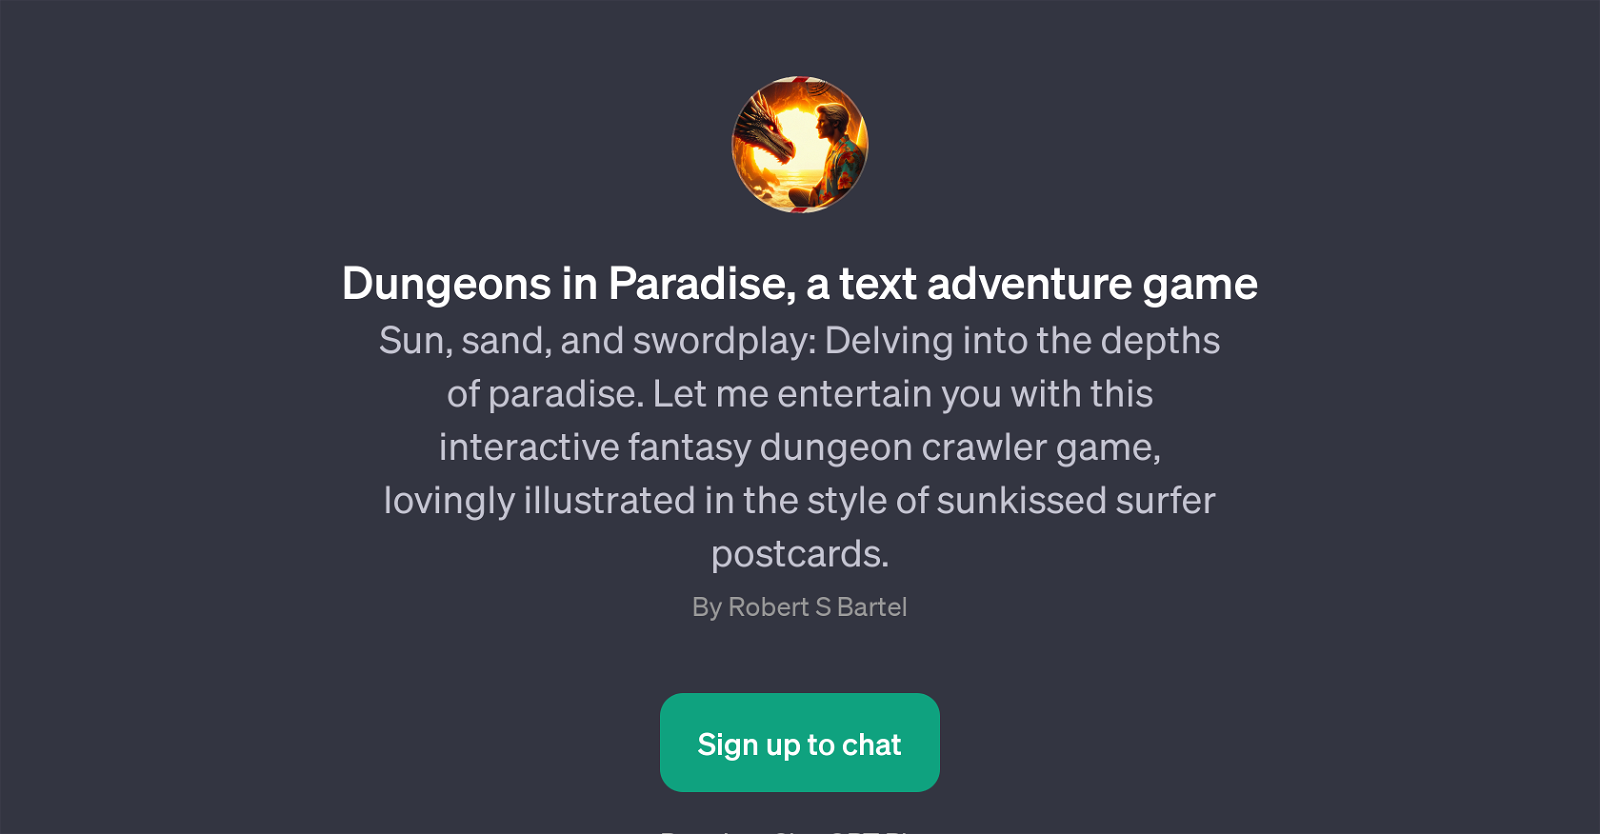 Dungeons in Paradise website